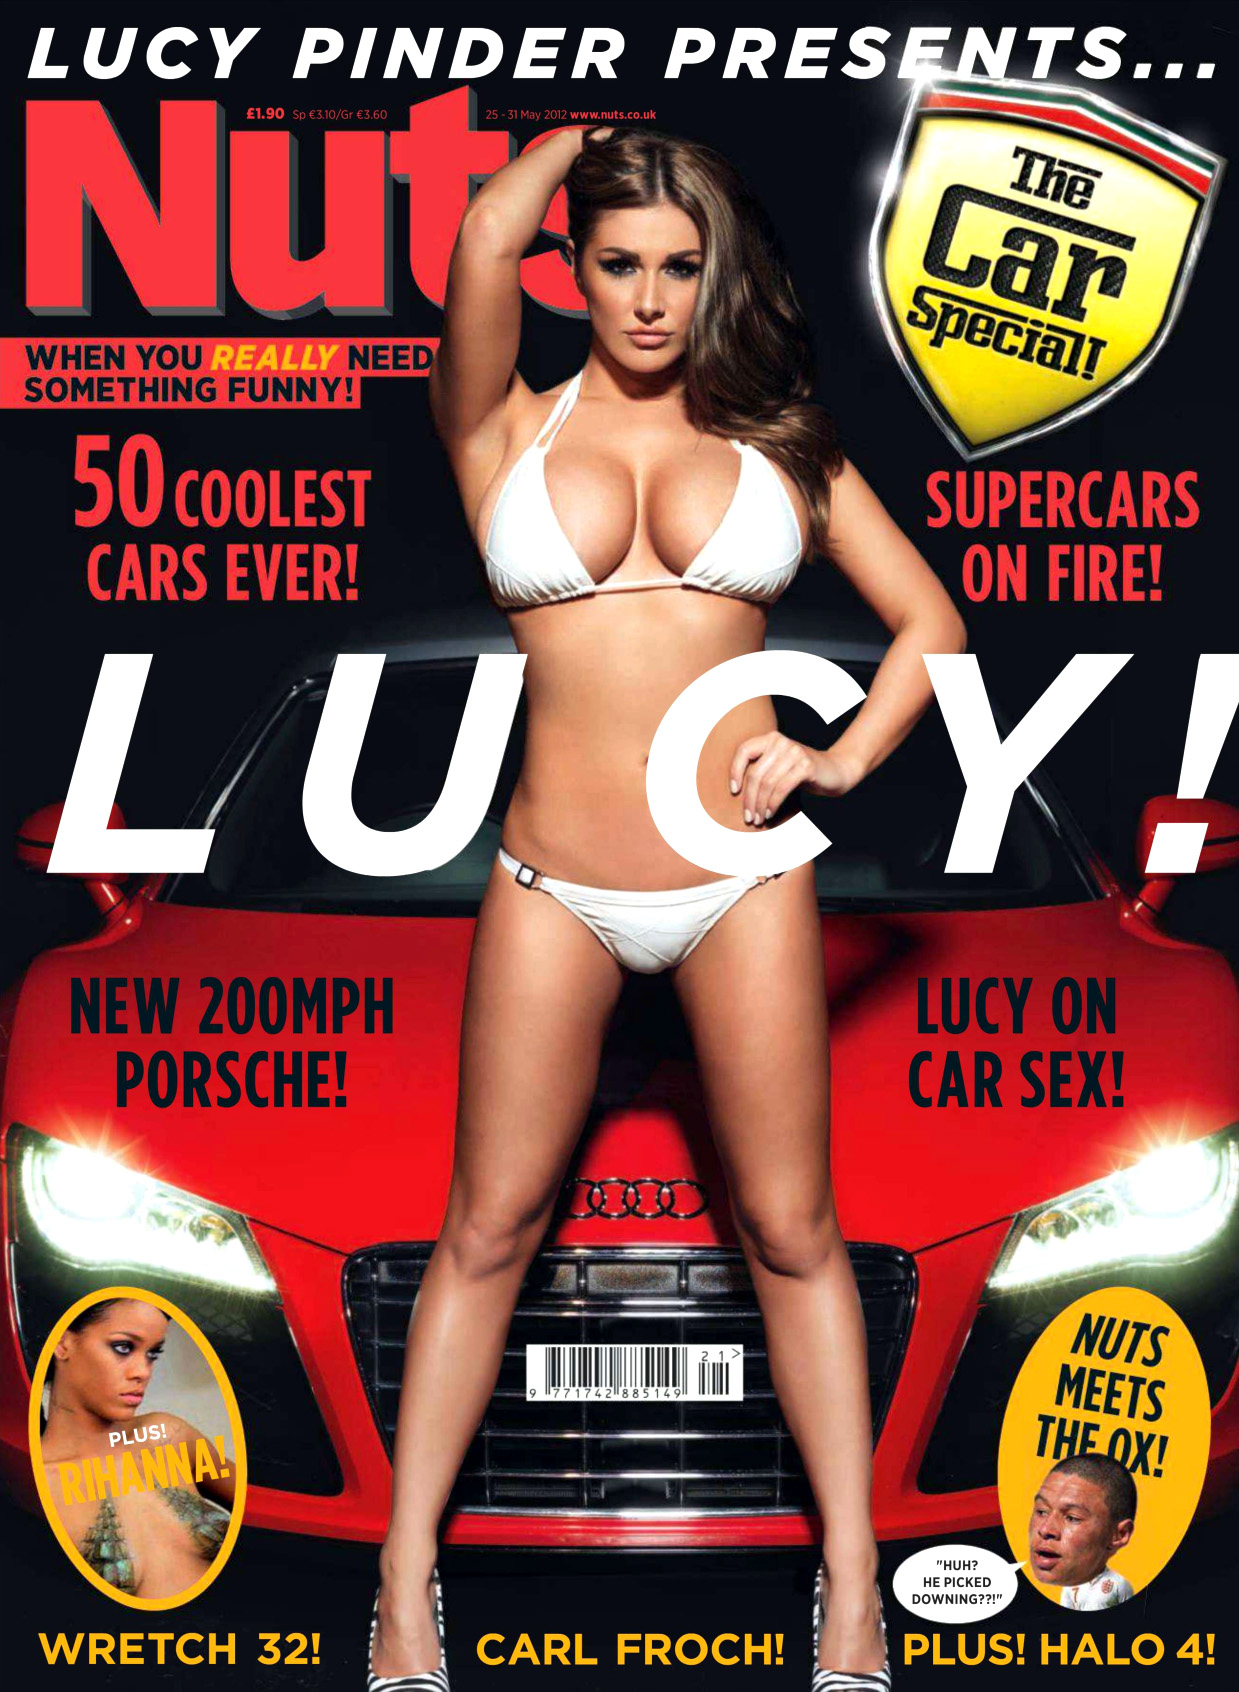 Lucy Pinder for Nuts Magazine “The Car Special” Your Daily Girl